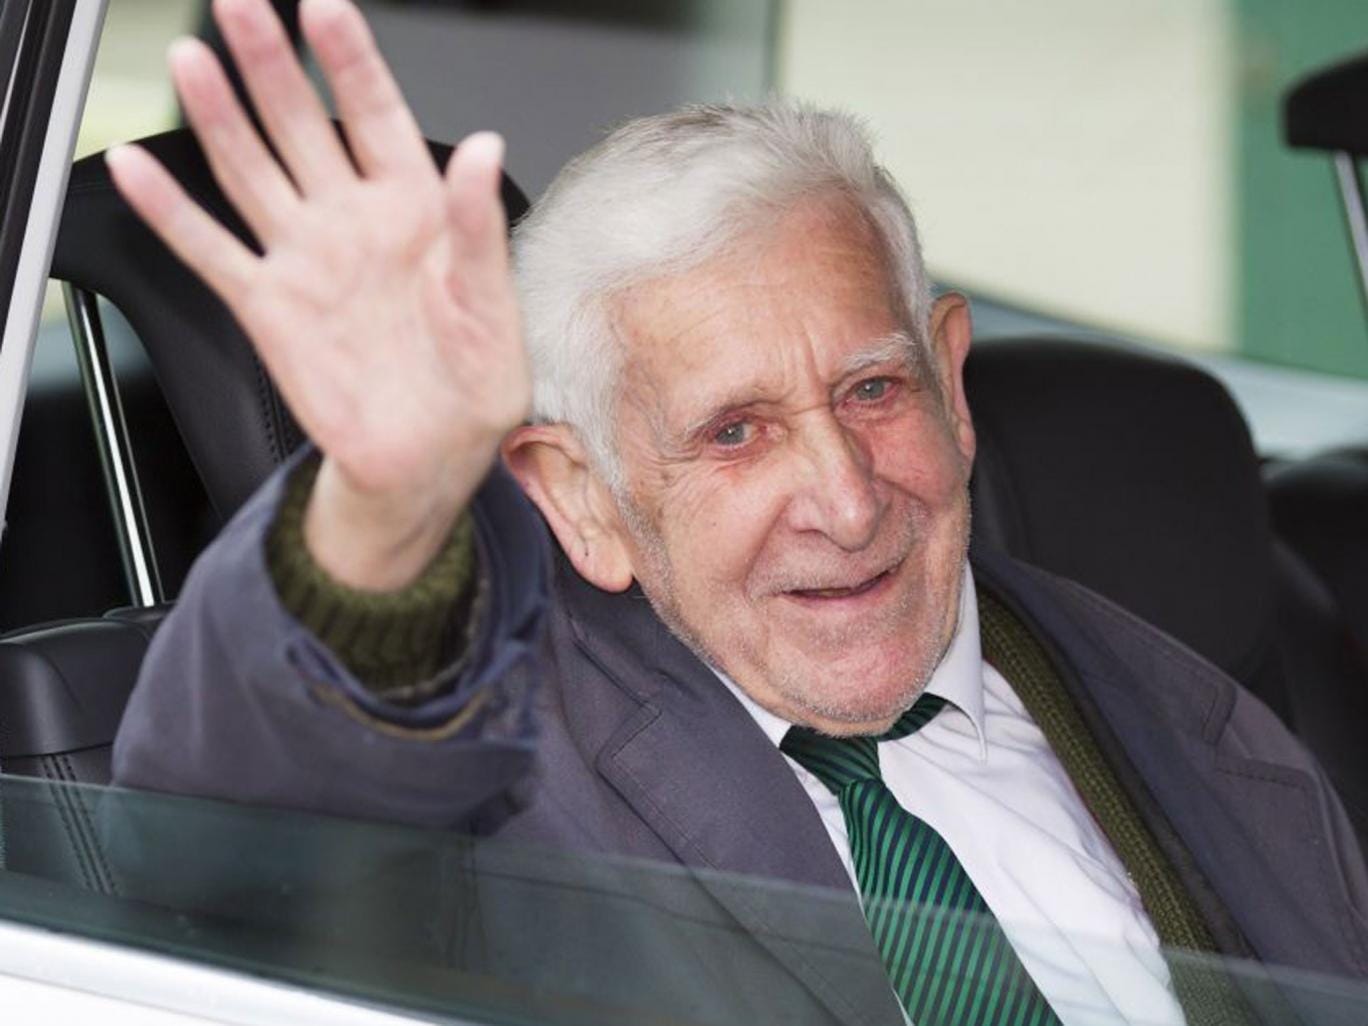 ... war veteran found in Normandy after being reported missing from his care home in Hove, Sussex, waves as he returns to Portsmouth on a Brittany Ferry PA - AN45290254Bernard-Jordan-thv2